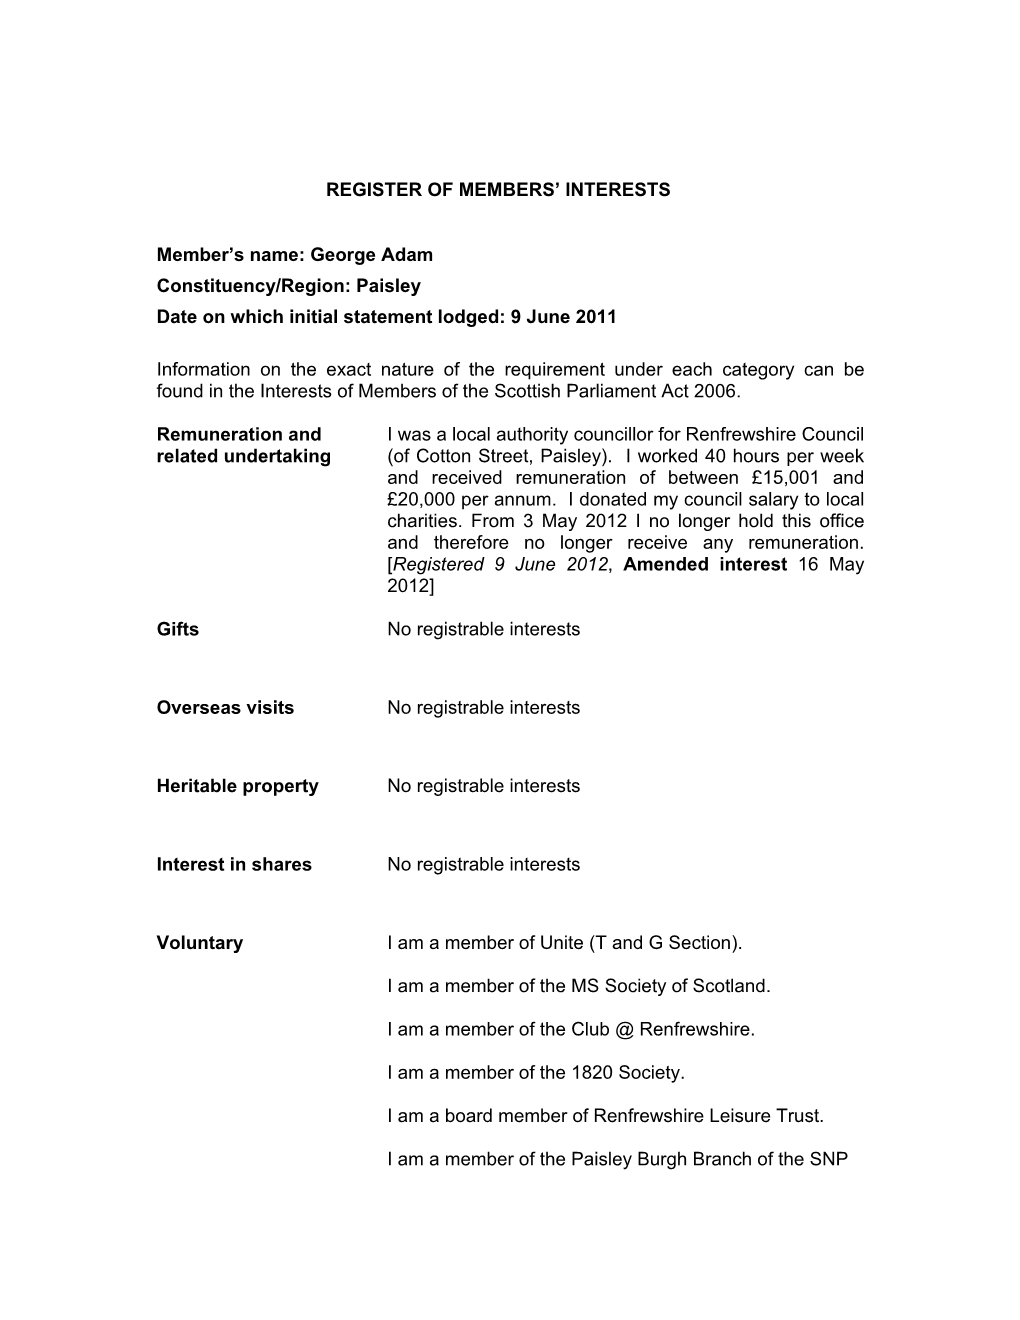 Register of Interests for the Parliamentary Year 11 May 2014 To